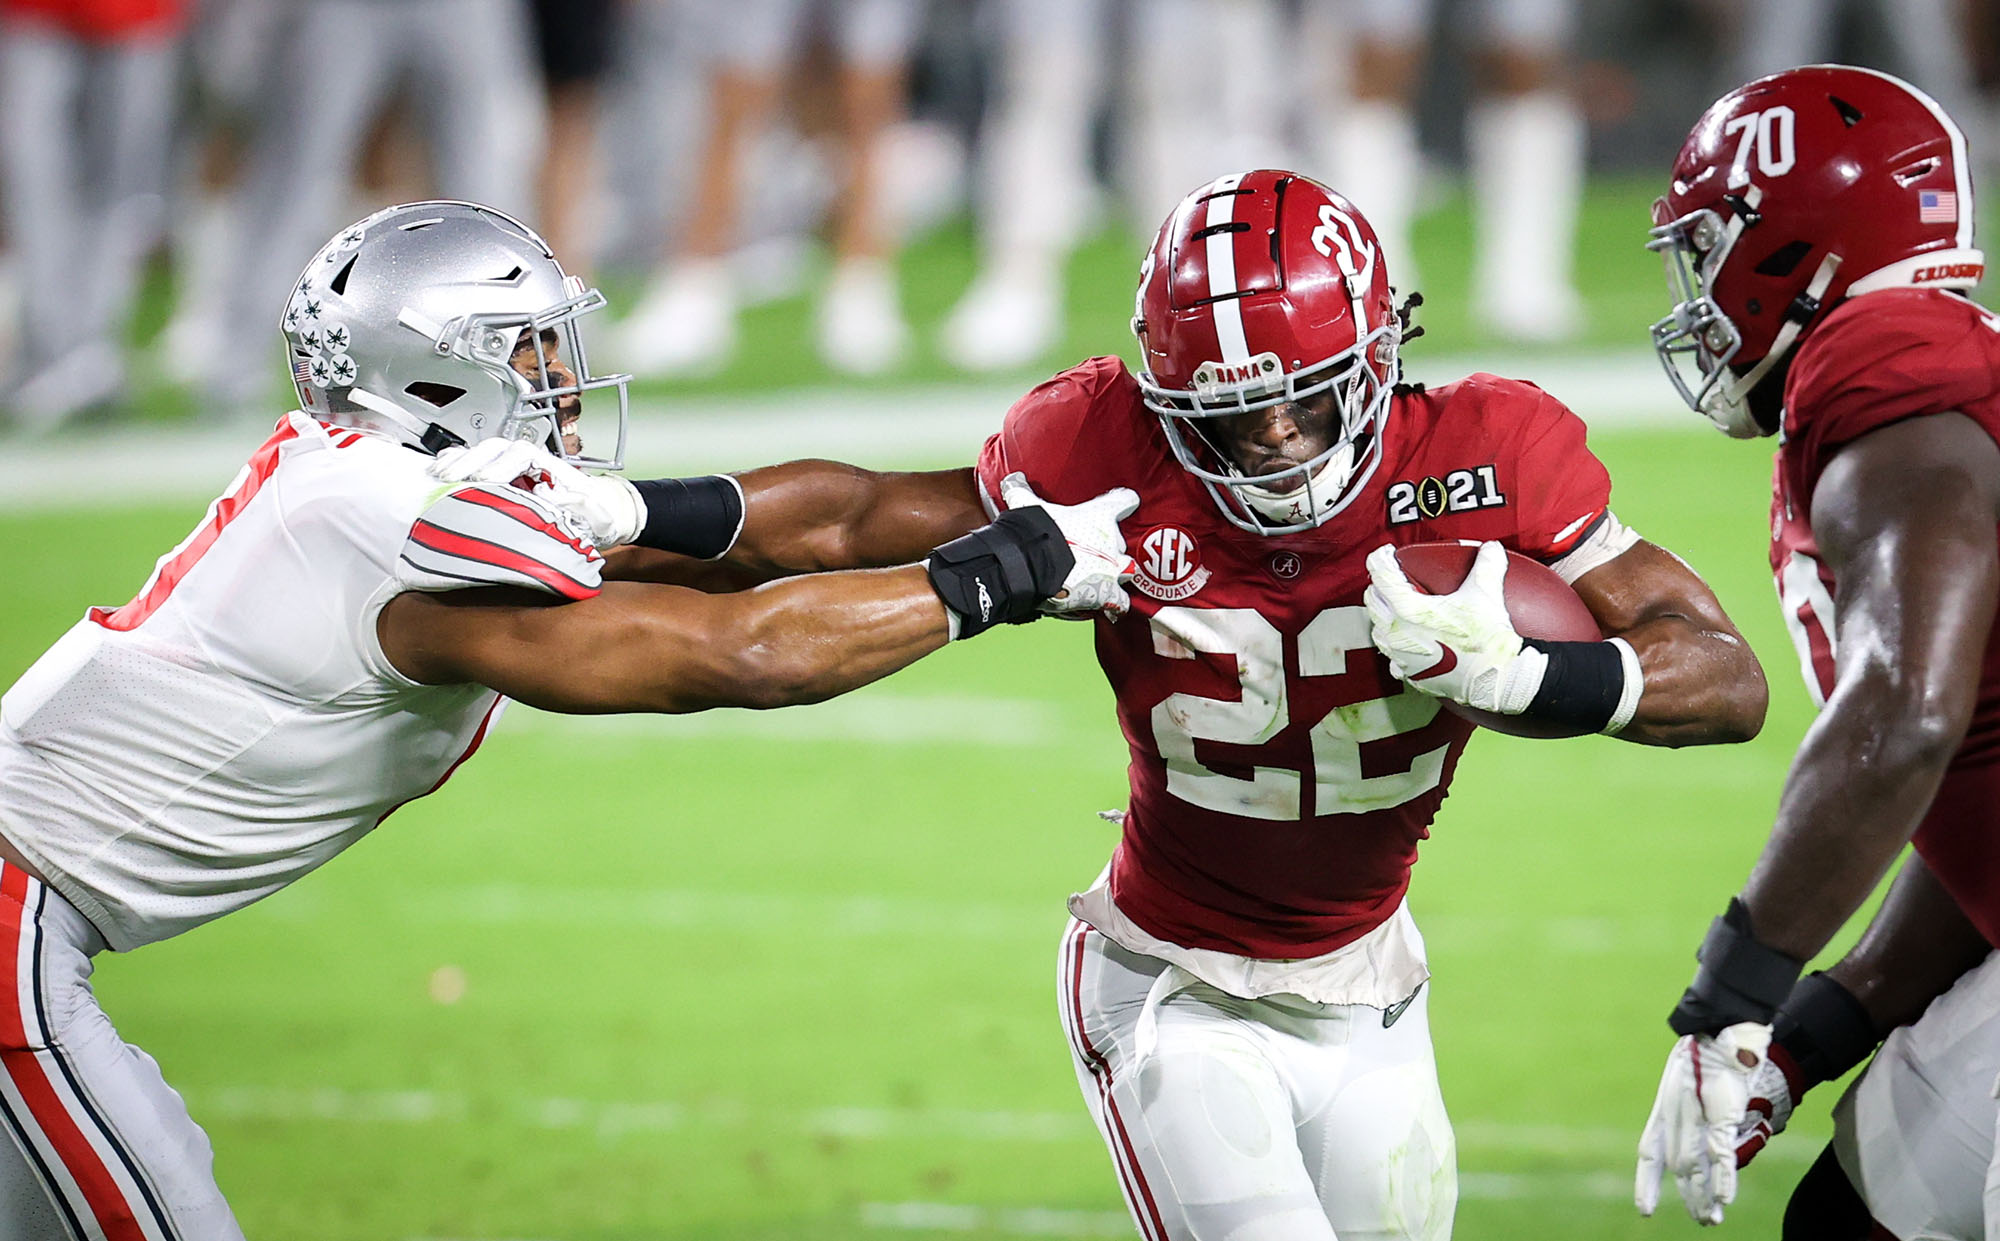 Alabama Crimson Tide running back Najee Harris (22) during the 2021 College Football Playoffs National Championship game on Monday, Jan. 11, 2021 in Miami, Fla. (Photo by Matt Stamey)